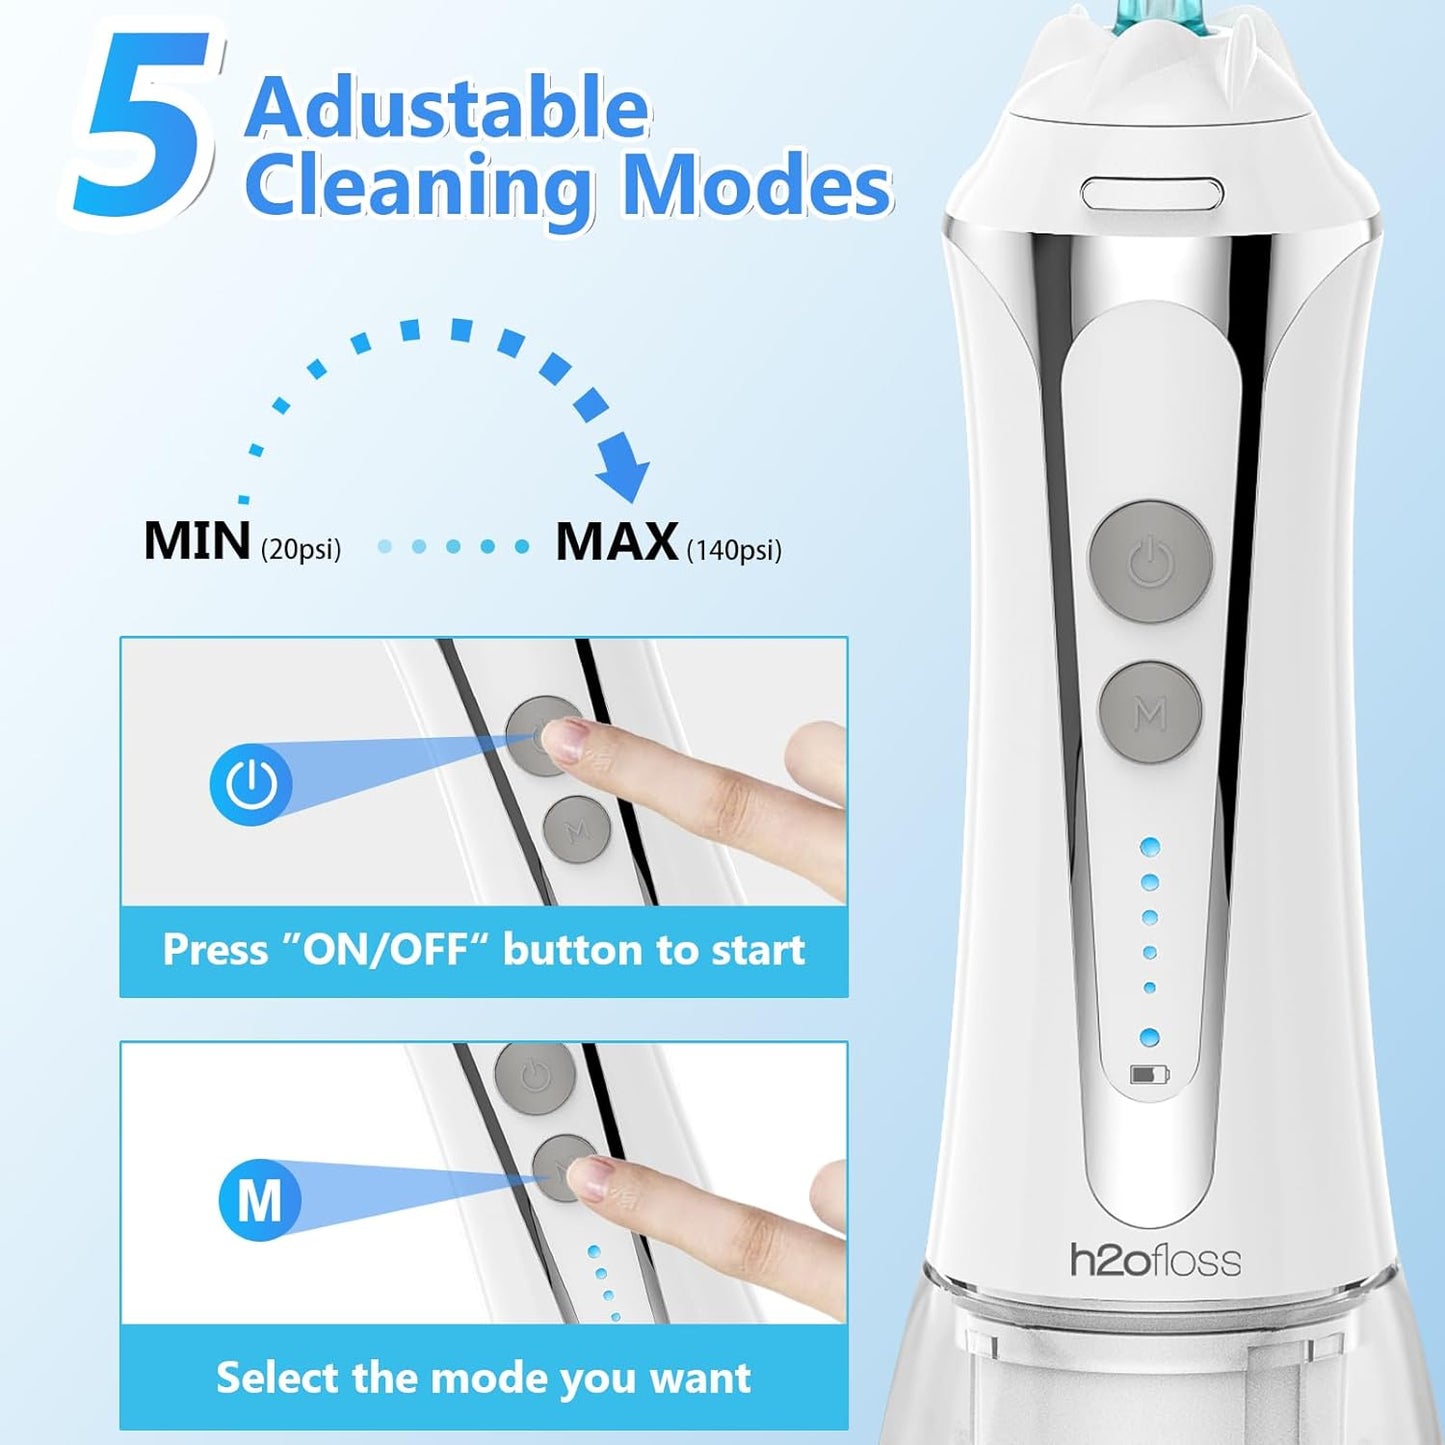 Water Dental Flosser Cordless, 300ML Rechargeable Oral Irrigator for Teeth Cleaning, Portable & IPX7 Waterproof Teeth Cleaner Pick for Braces Home Travel